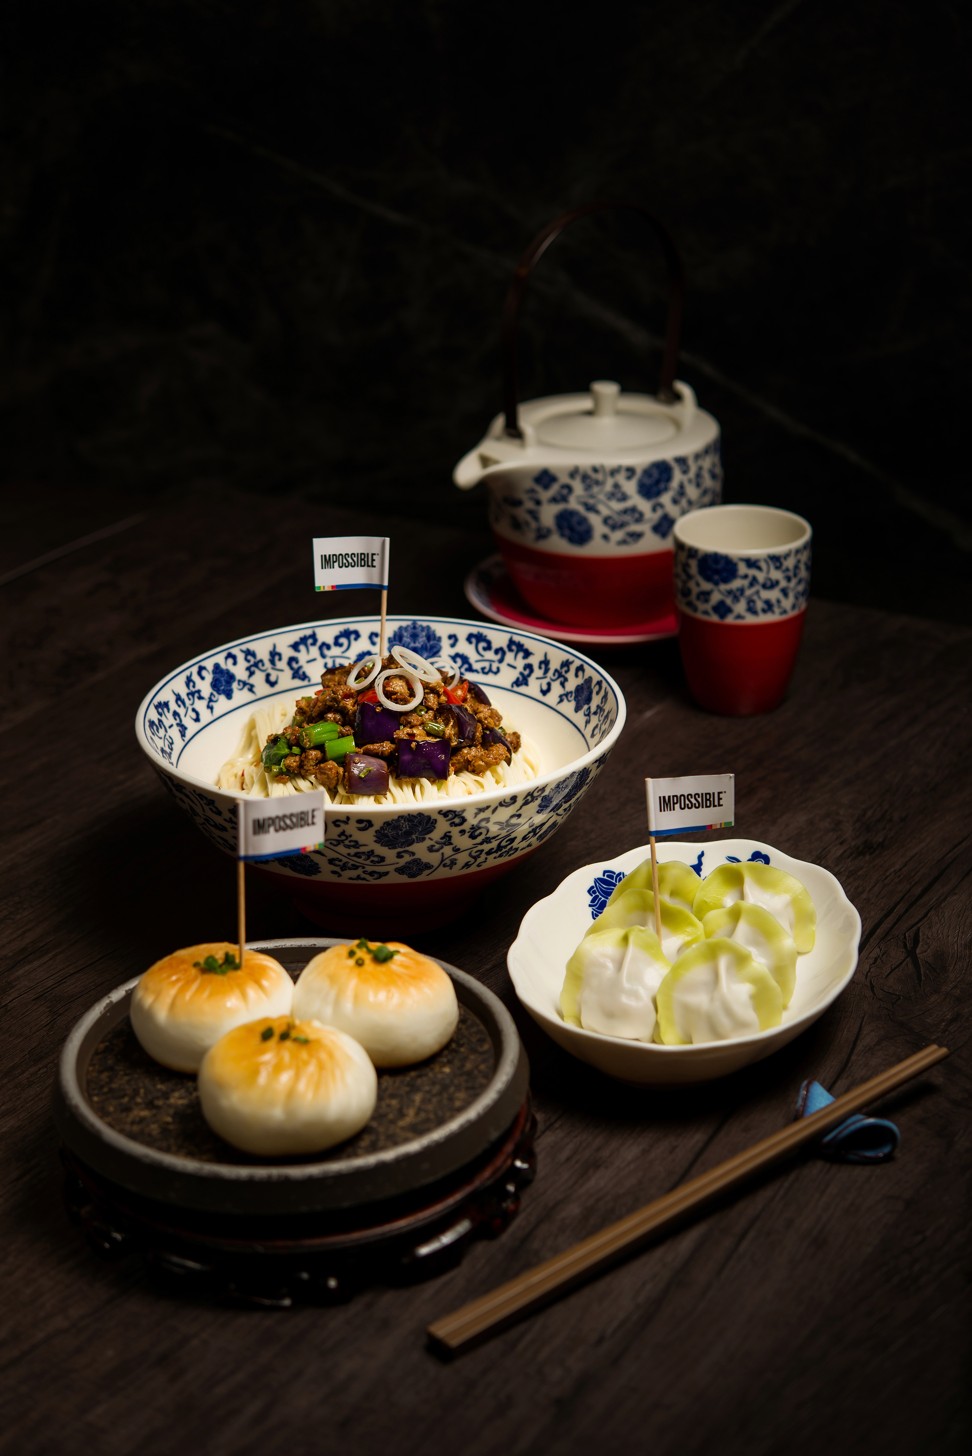 Seared buns, chive dumplings and tossed noodles with spiced aubergines are made using Impossible Foods’ plant-based ‘meat’, at The Noodle Kitchen, Galaxy Macau’s Northern Chinese restaurant.